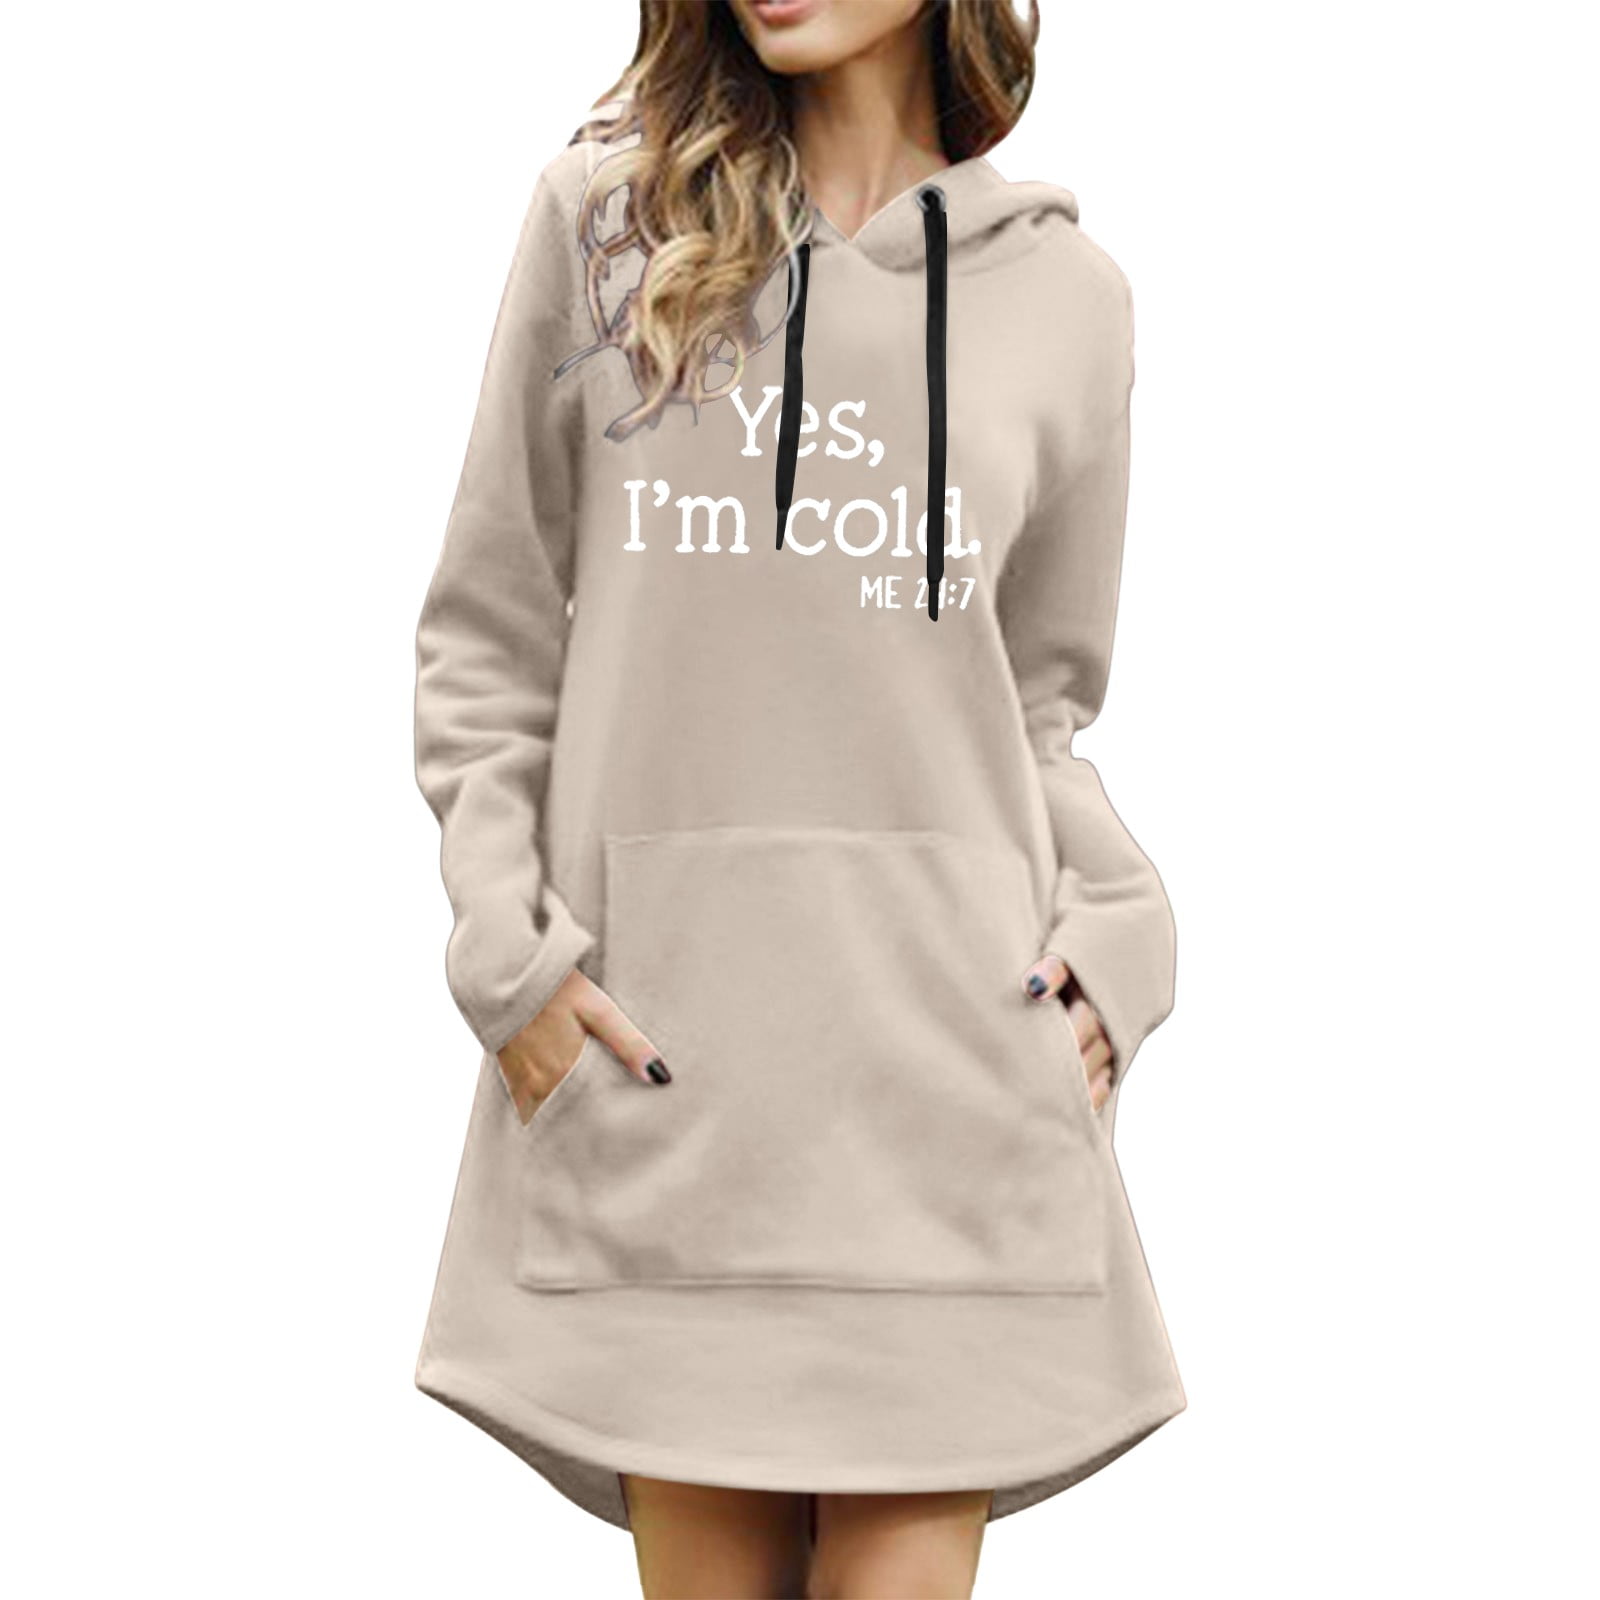  HUMMHUANJ Hoodies for Women Solid Color,Womens Tops Under 10  Dollars,One Cent Items,White Tshirts Bulk,Dress Sale,Add On Items,Things  for Under 2 Dollars : Clothing, Shoes & Jewelry